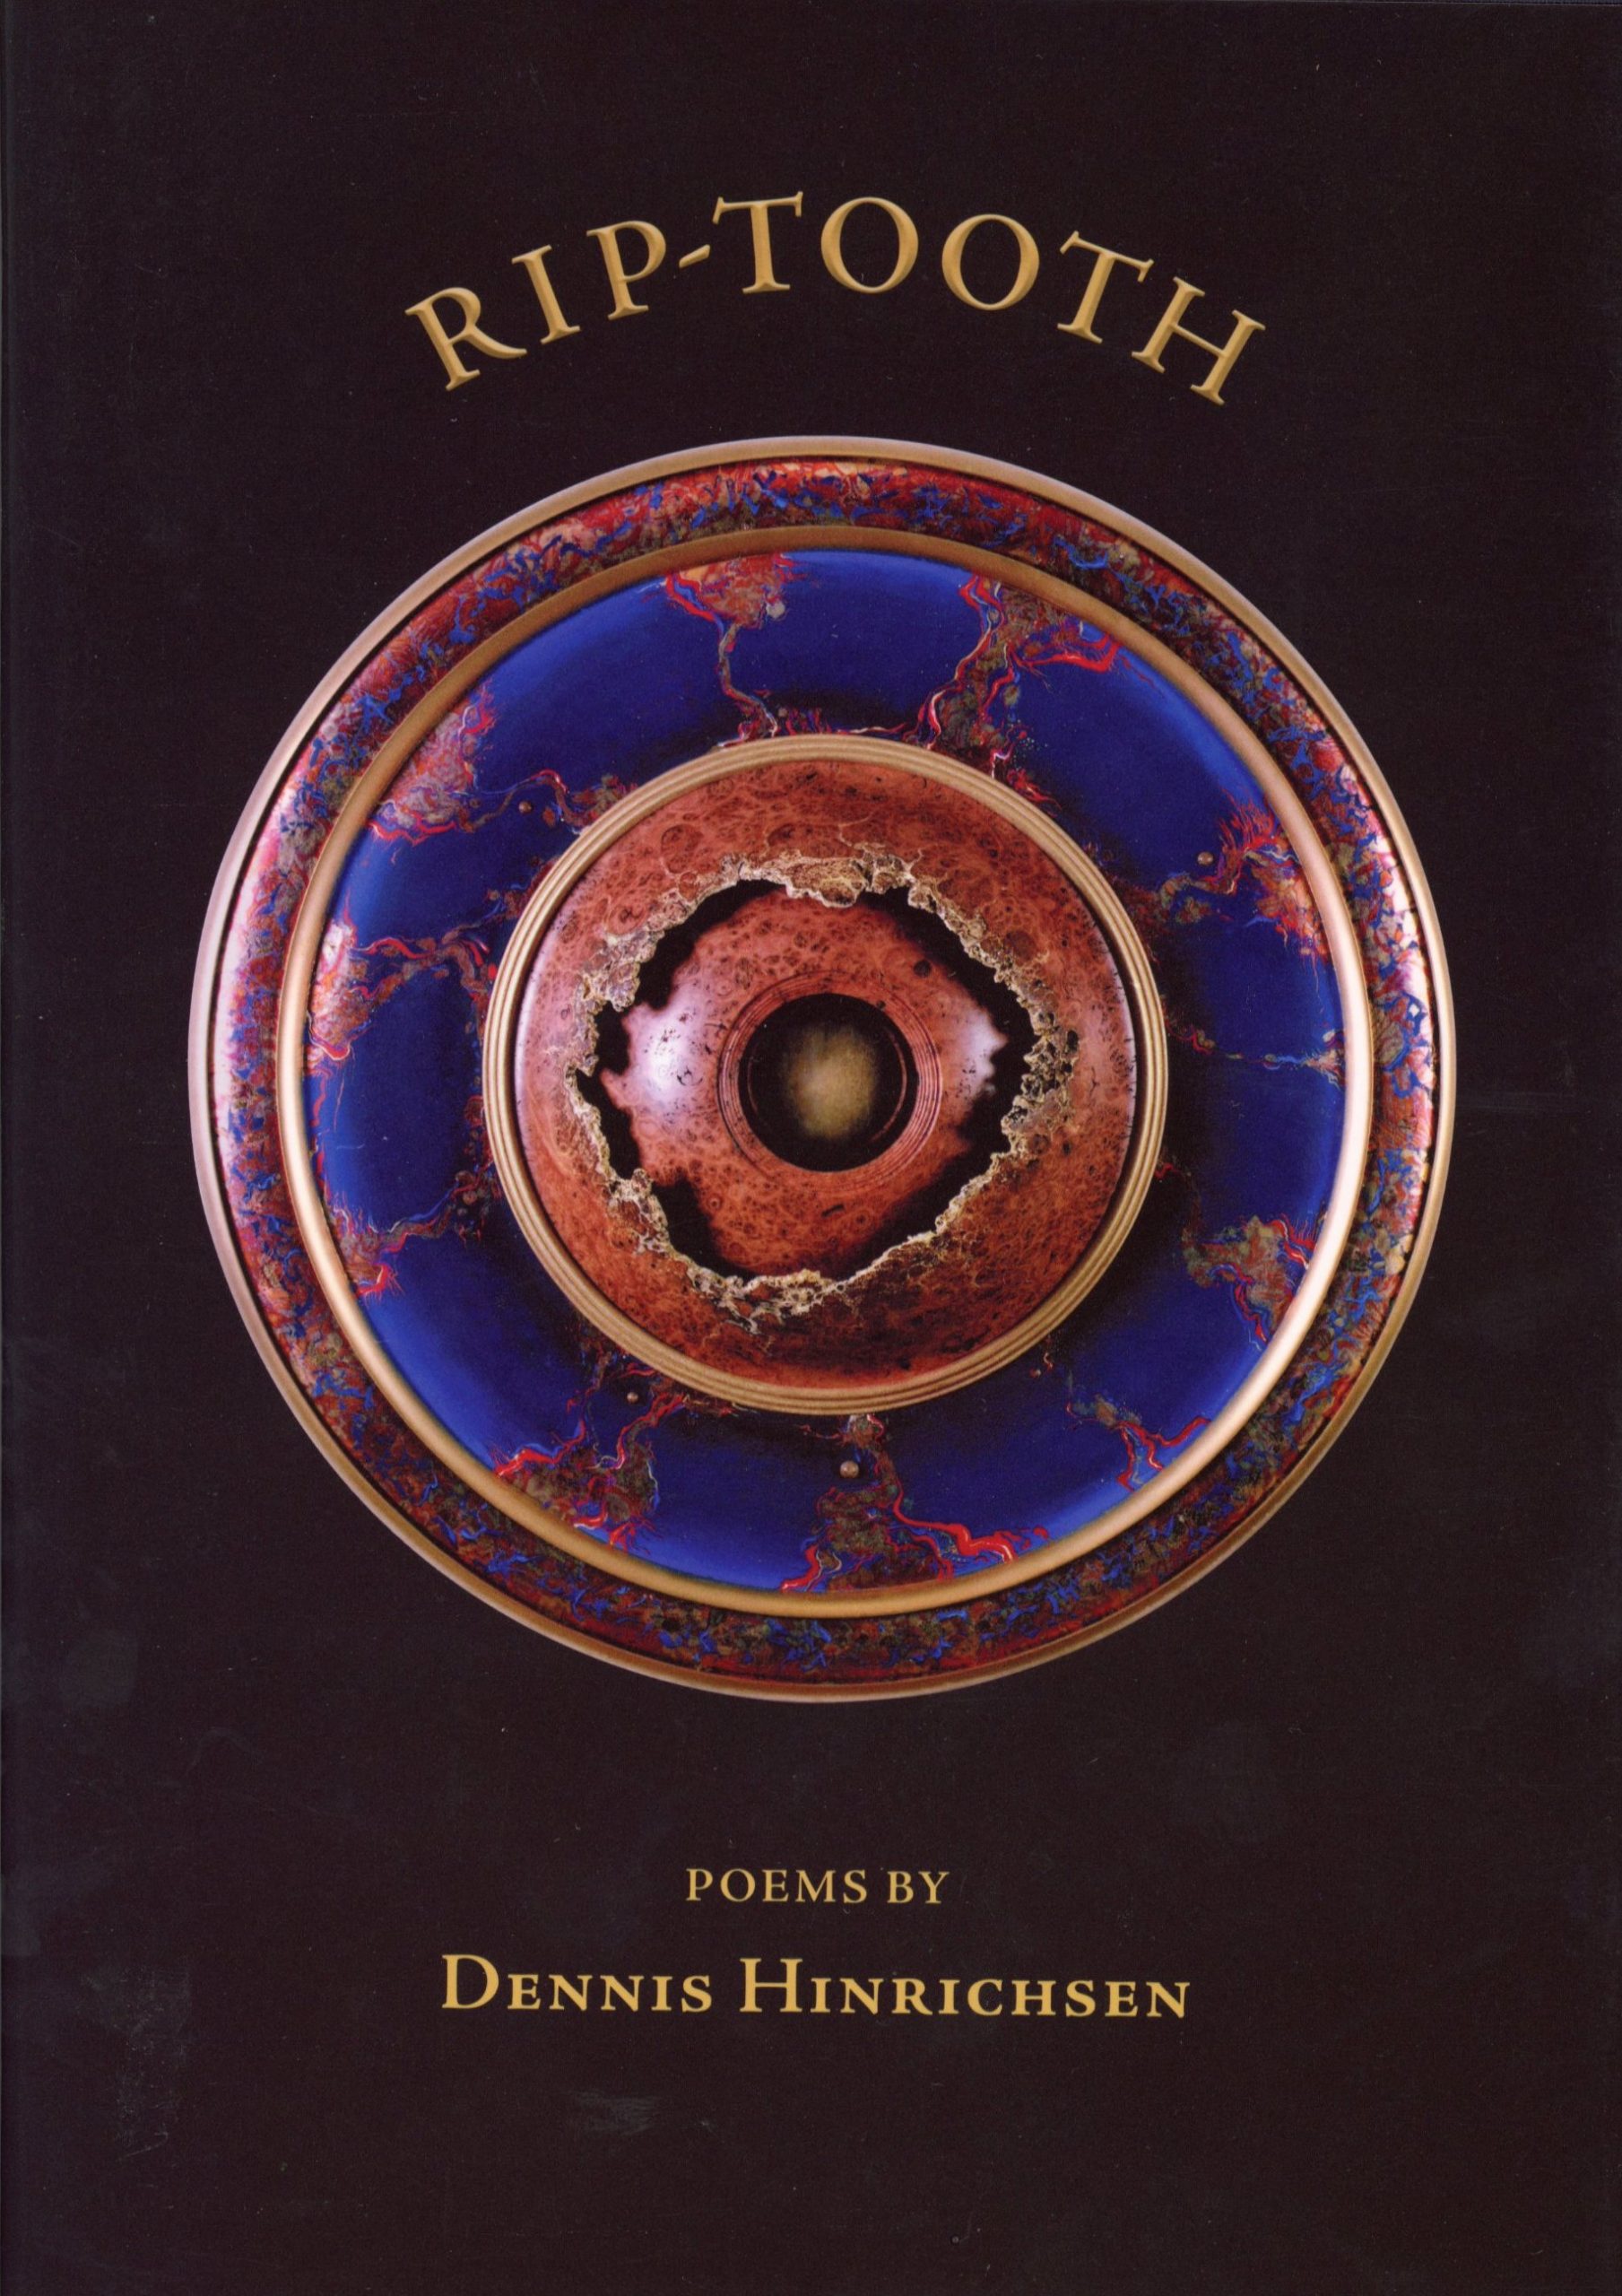 Image of the front cover of Rip-Tooth.